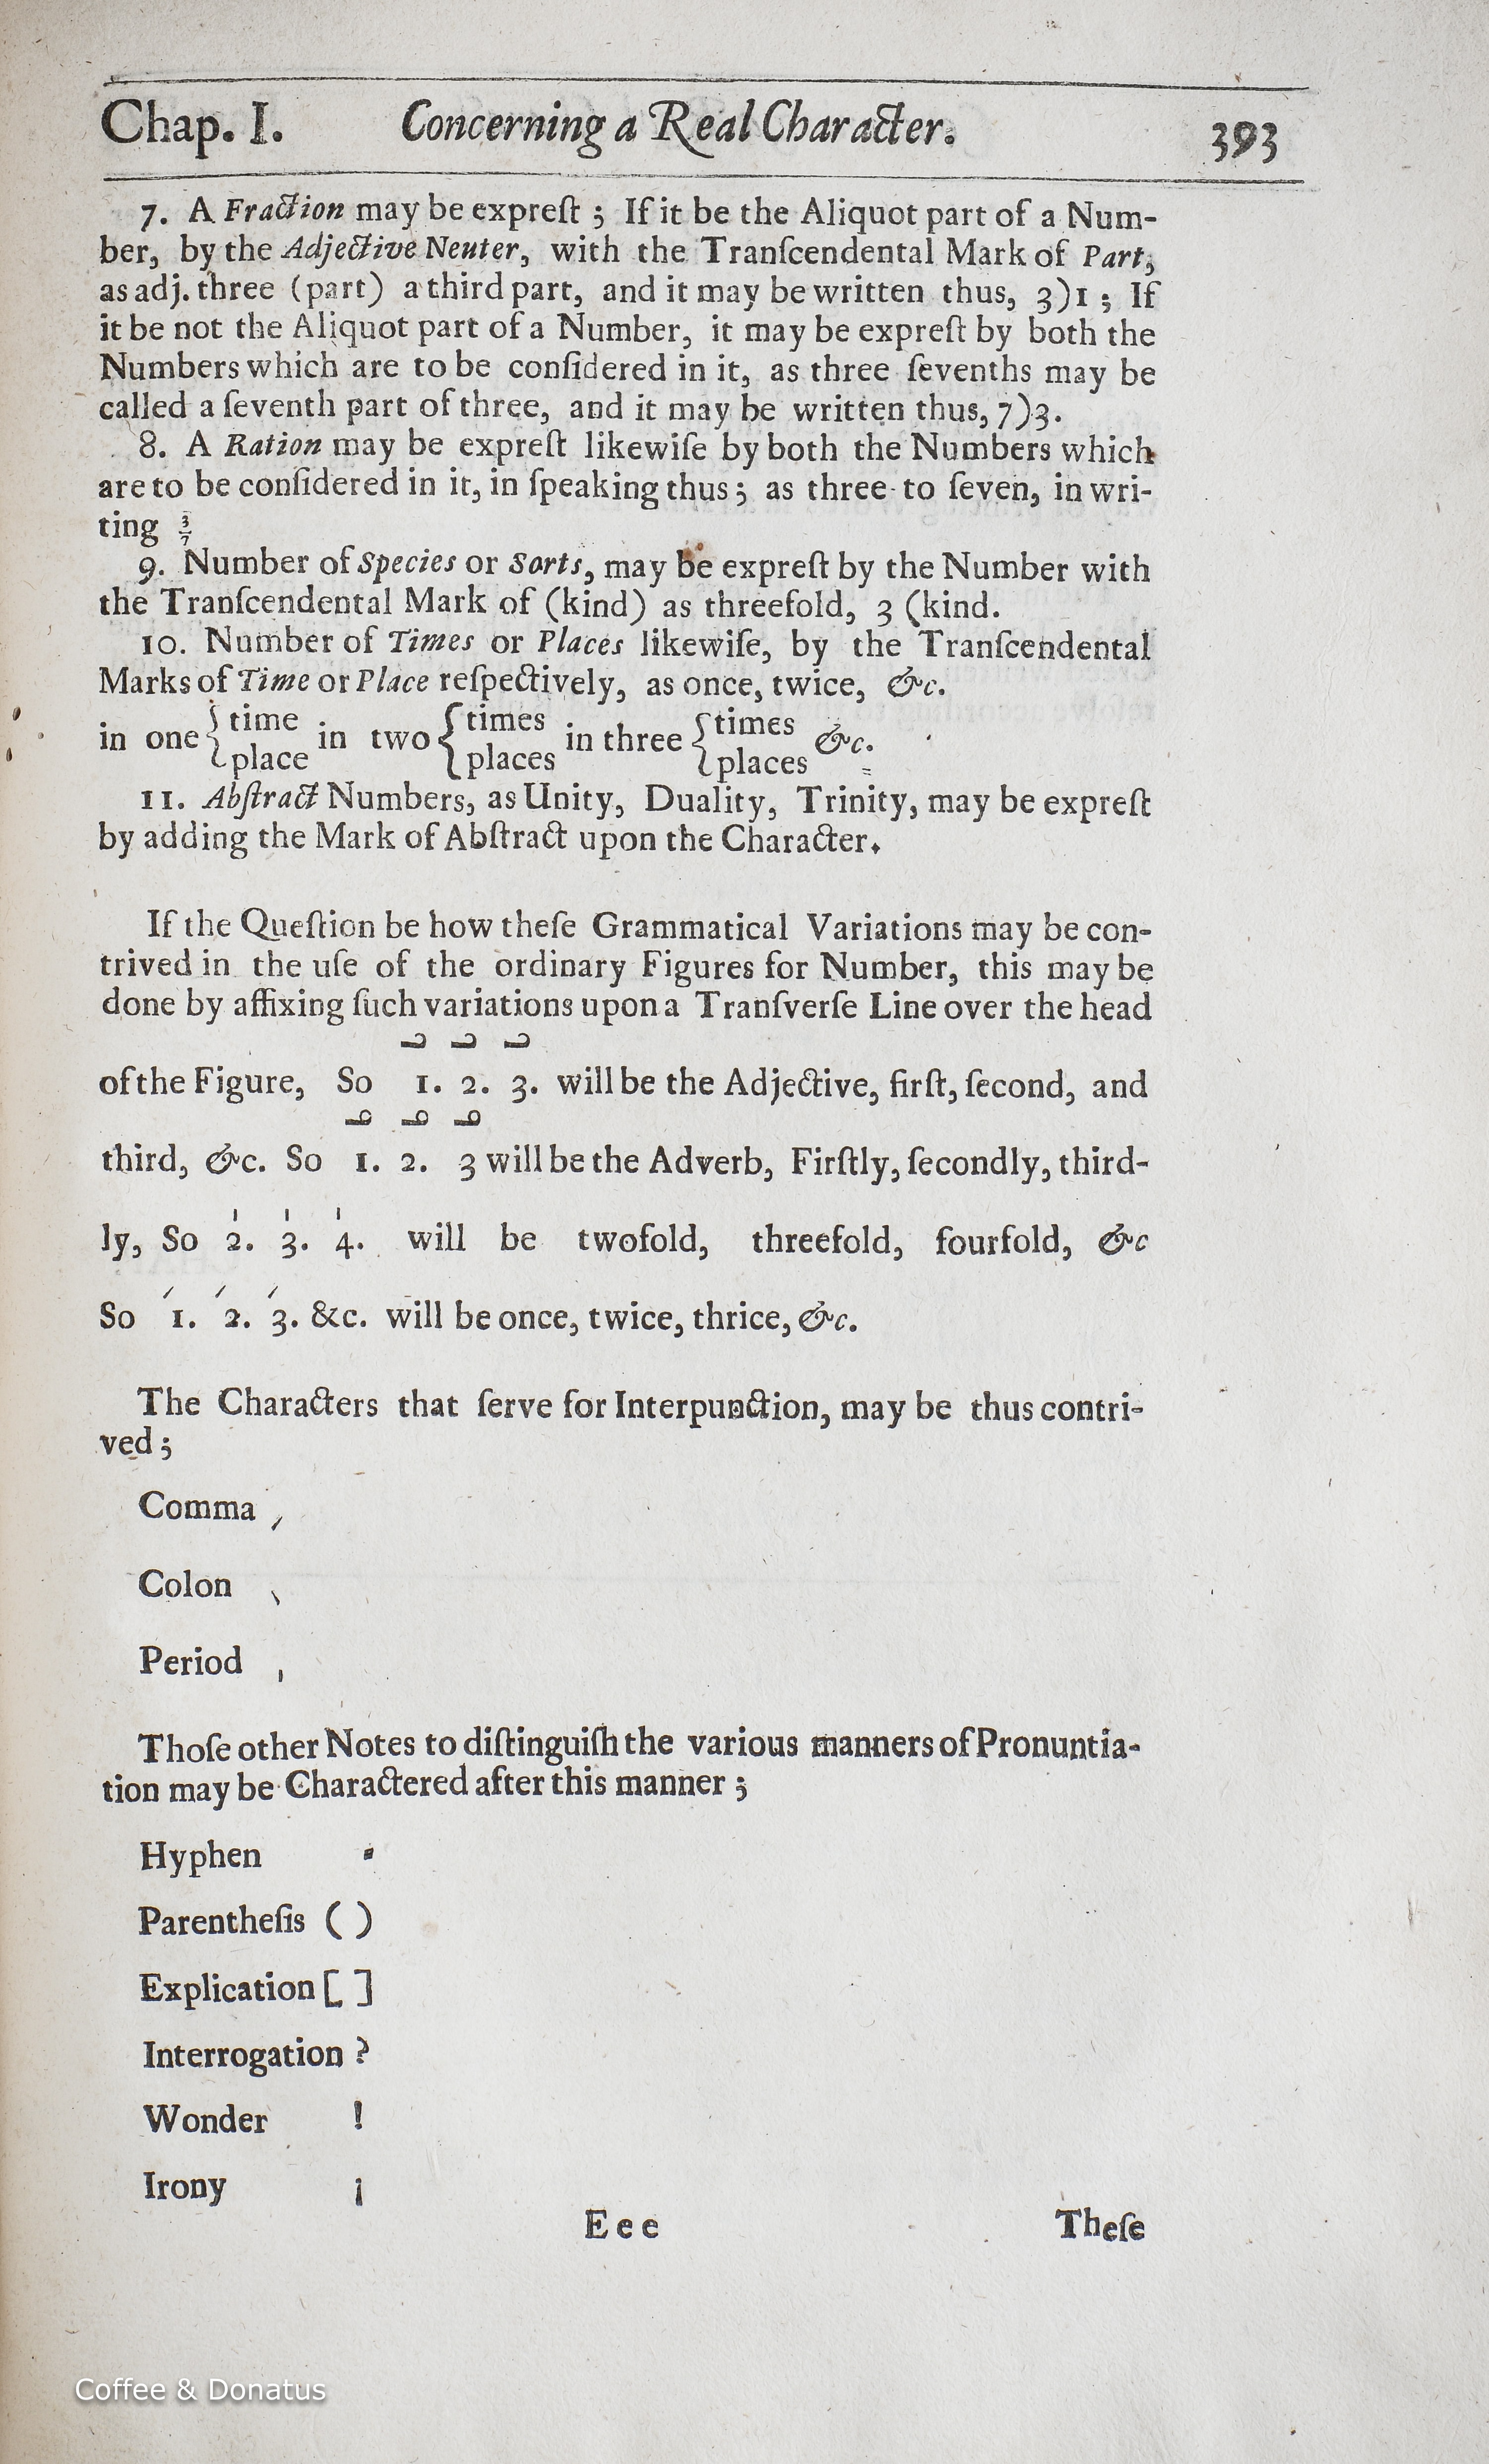 Wilkins’ description of the punctuation marks to be used with his “real characters”